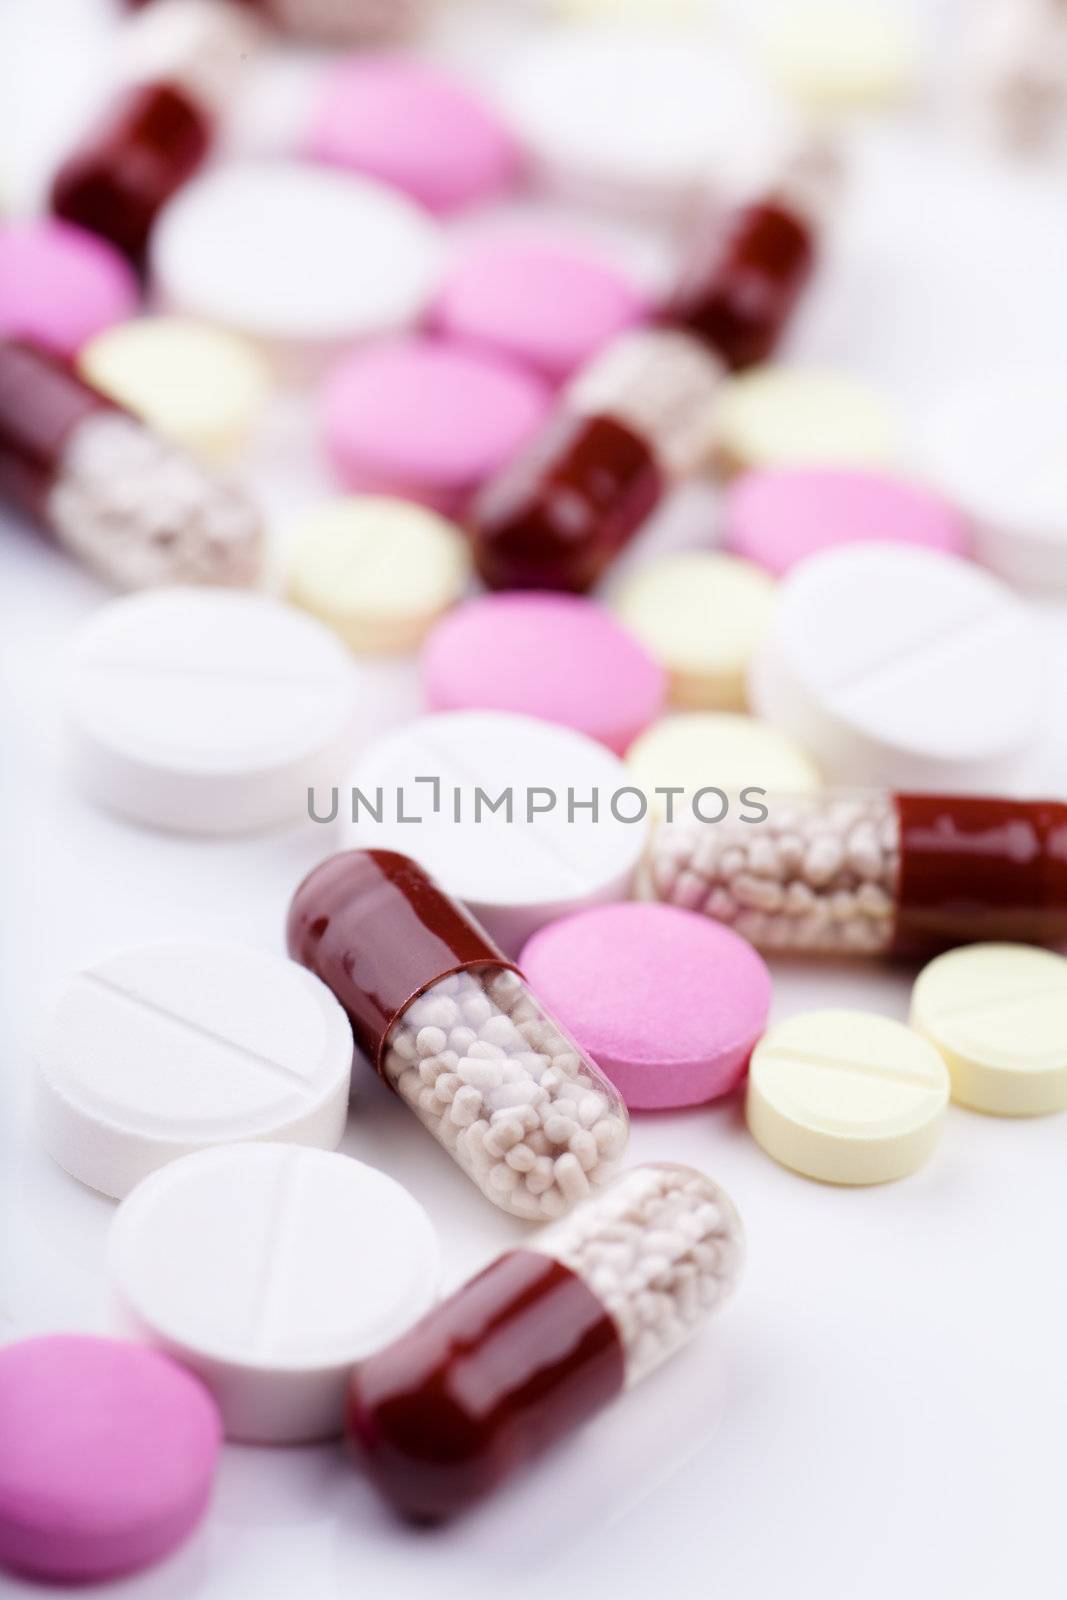 Macro view of heap of pills and capsules over white background